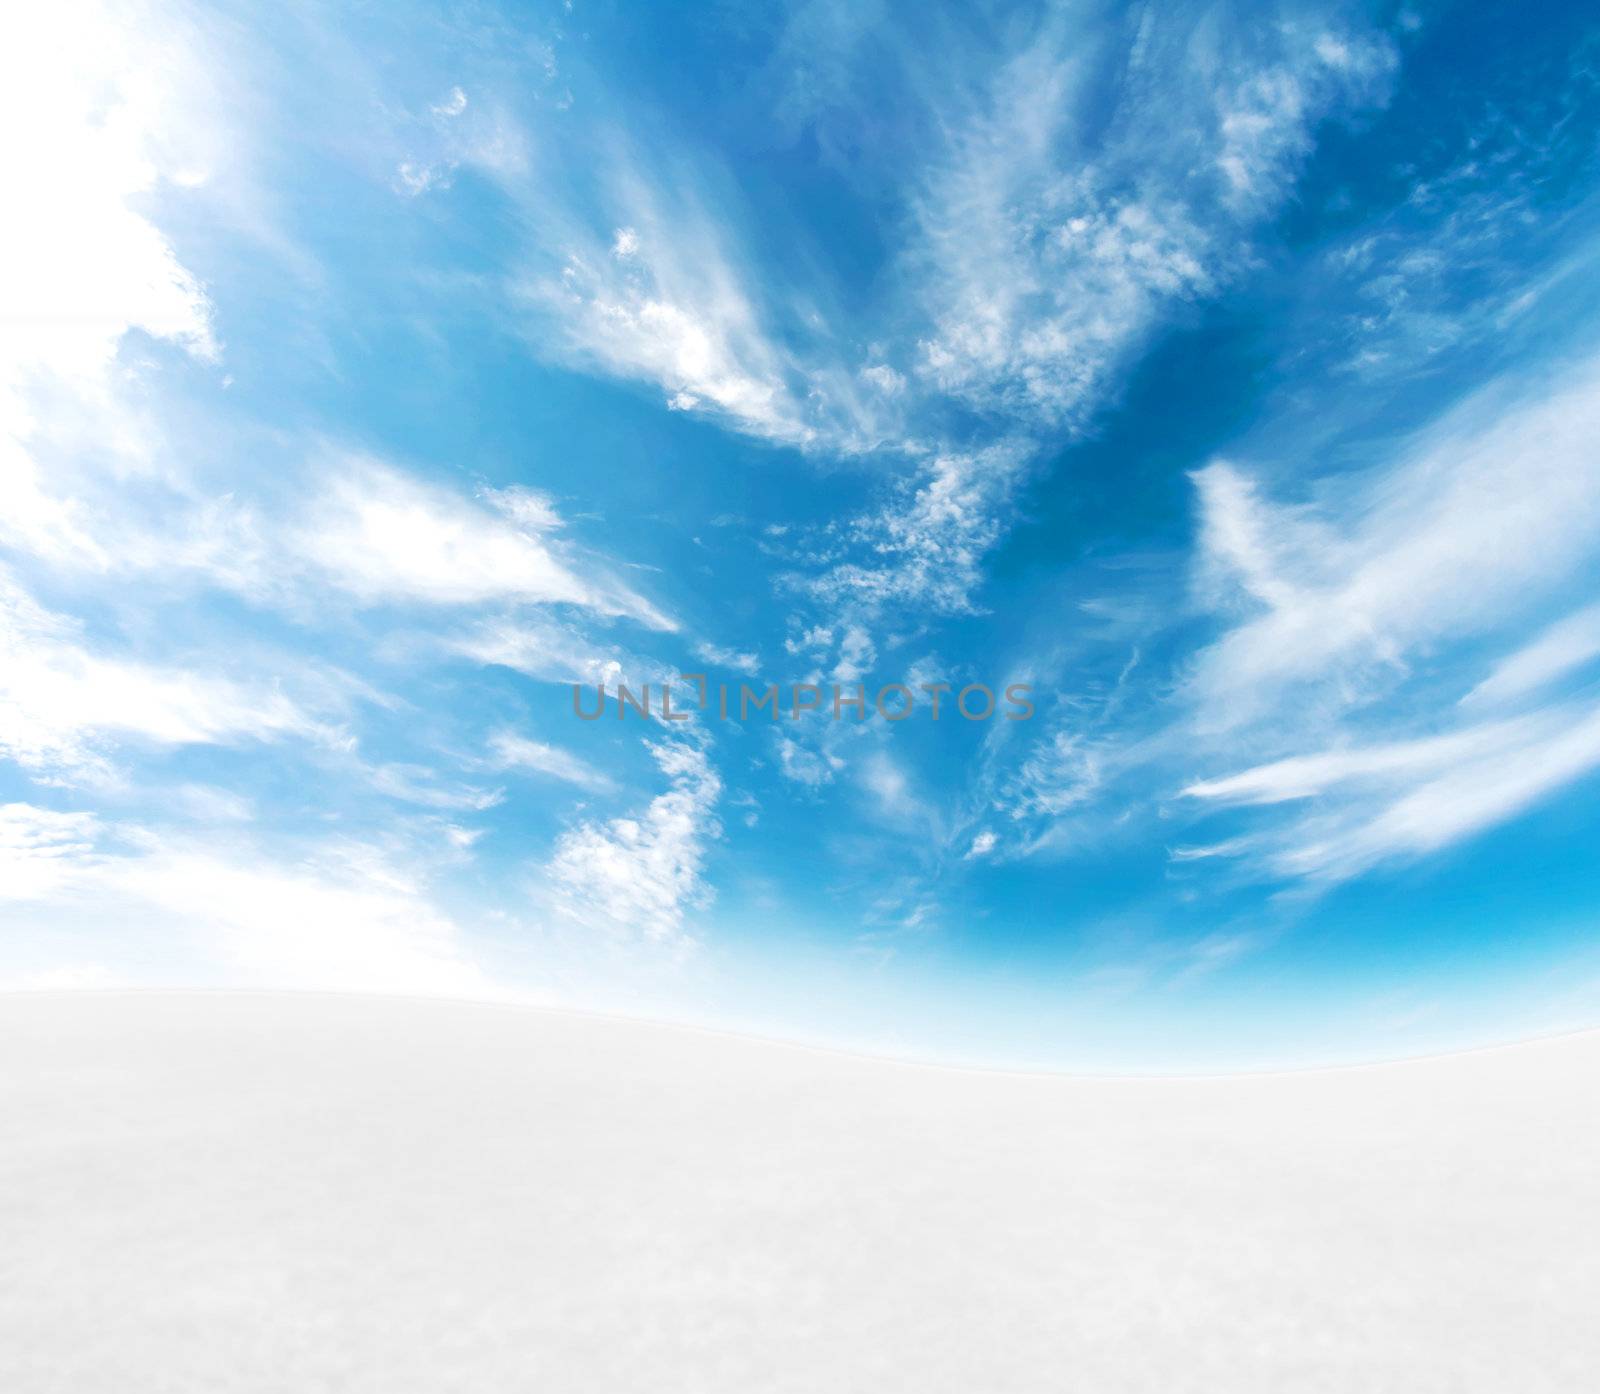 A simple tranquil beautiful S-curved horizon with blue sky and snowy hills.